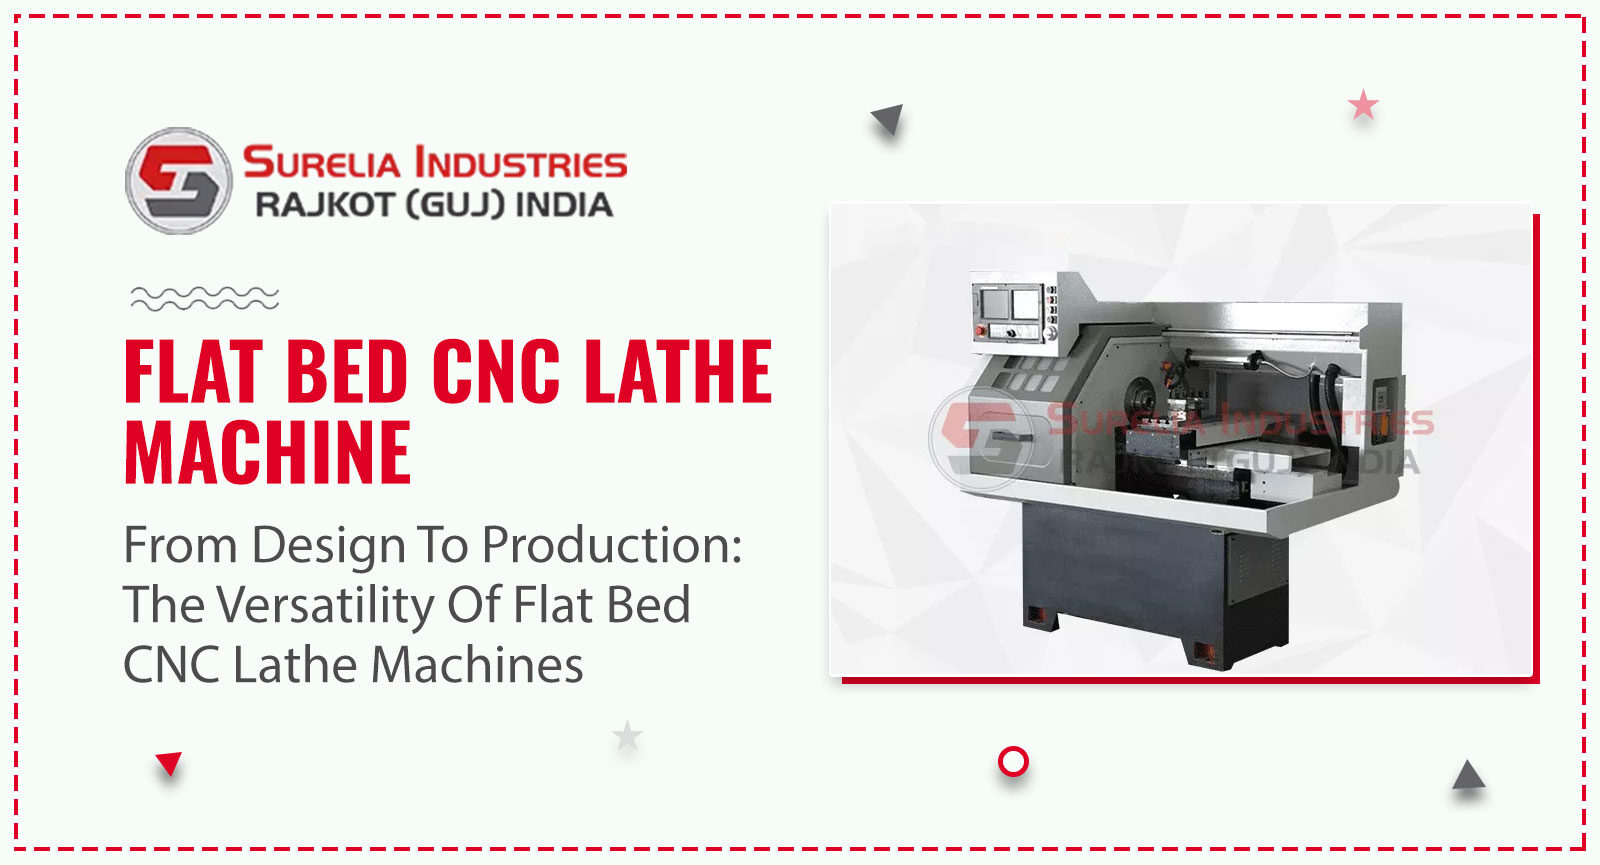 From Design to Production: The Versatility of Flat Bed CNC Lathe Machines, Lathe Machine